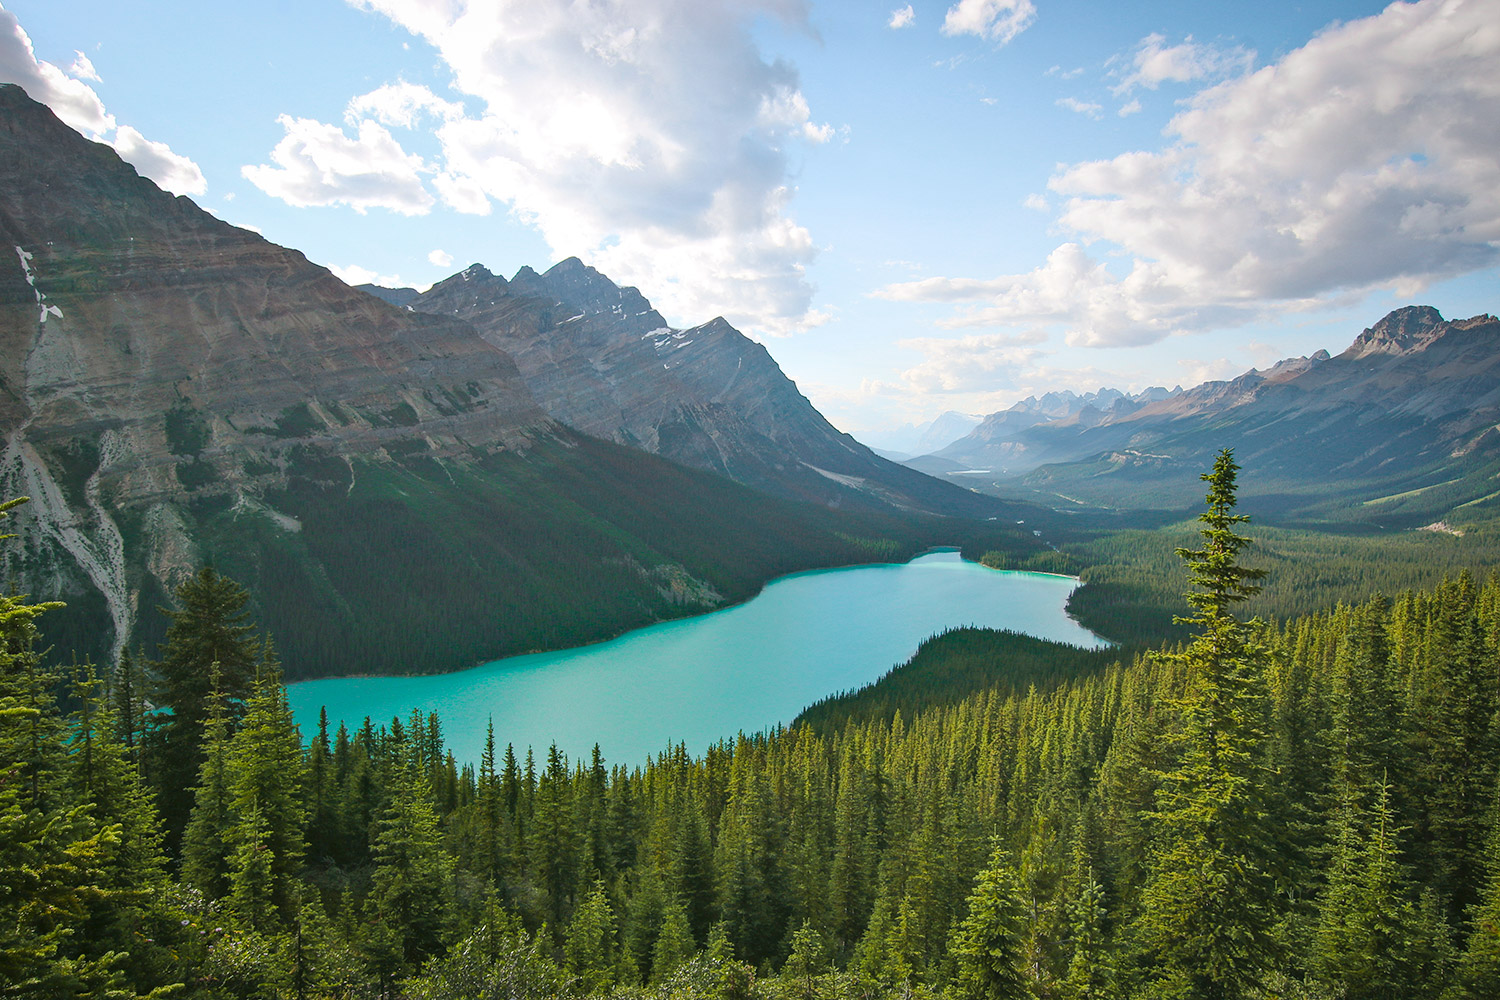 Lac Peyto, Icefield Parkway, Alberta, Rocheuses, Canada / Peyto Lake, Icefield Parkway, Alberta, Rockies, Canada.